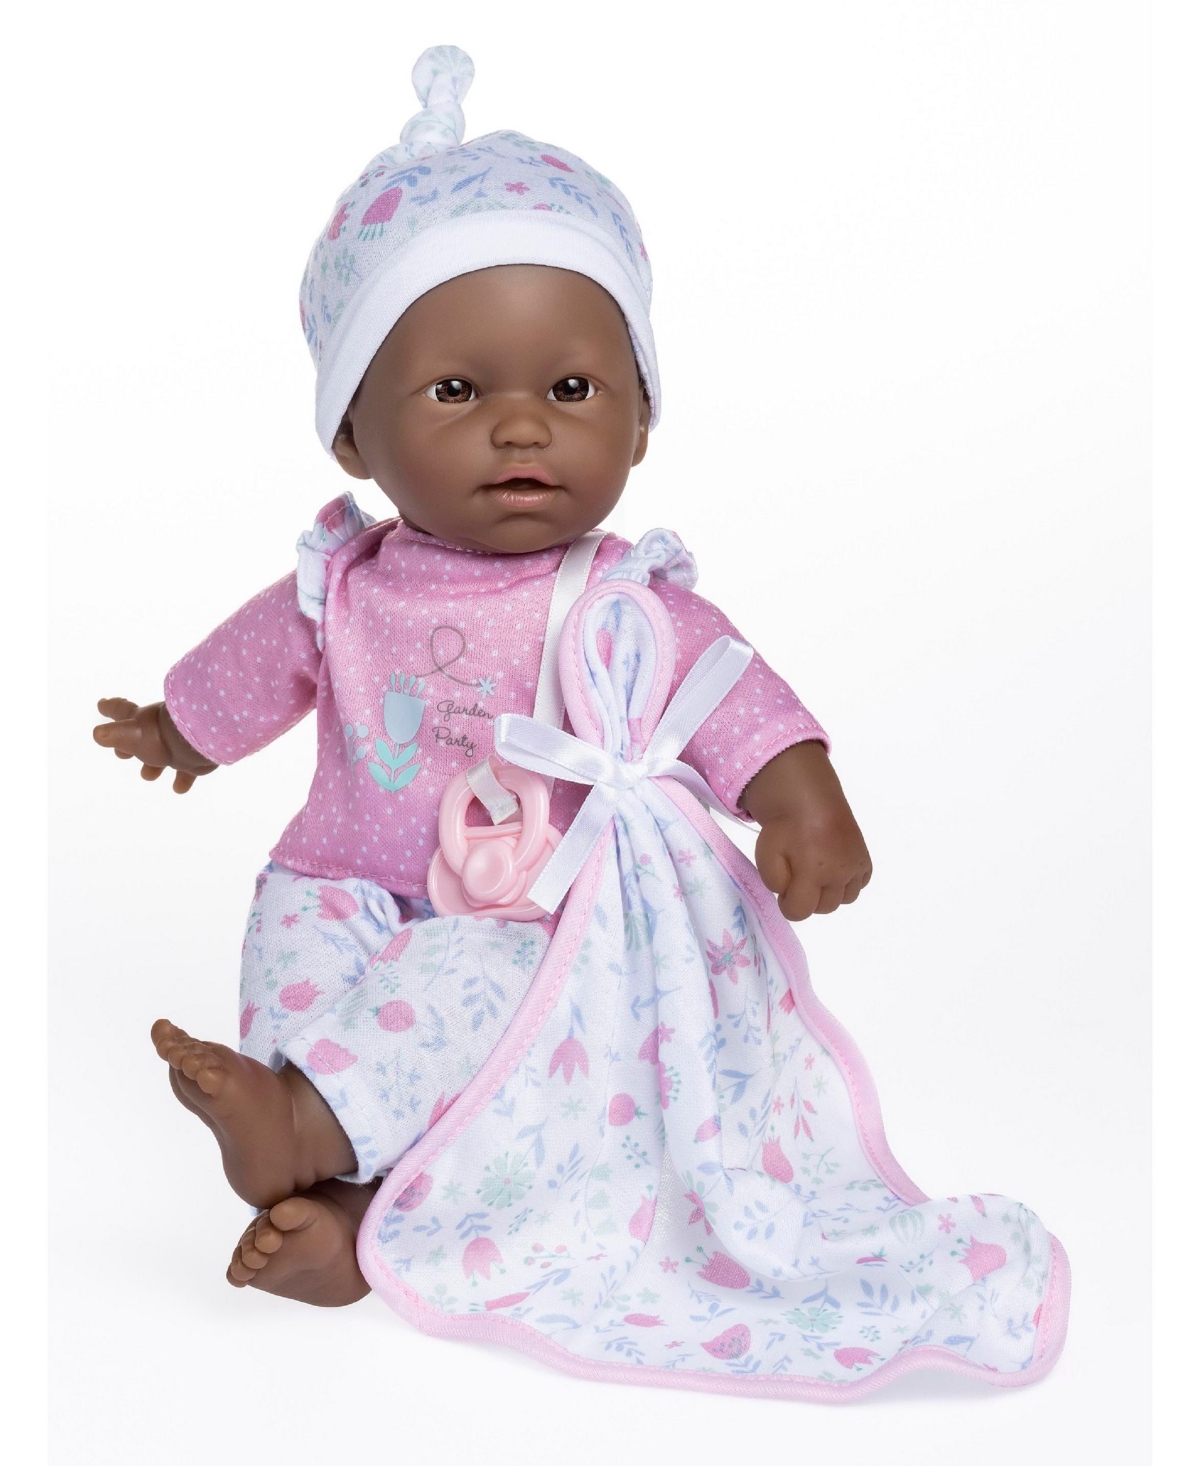 Jc Toys La Baby African American 11" Mini Soft Body Baby Doll With Blanket, Pacifier Set In Multicolor